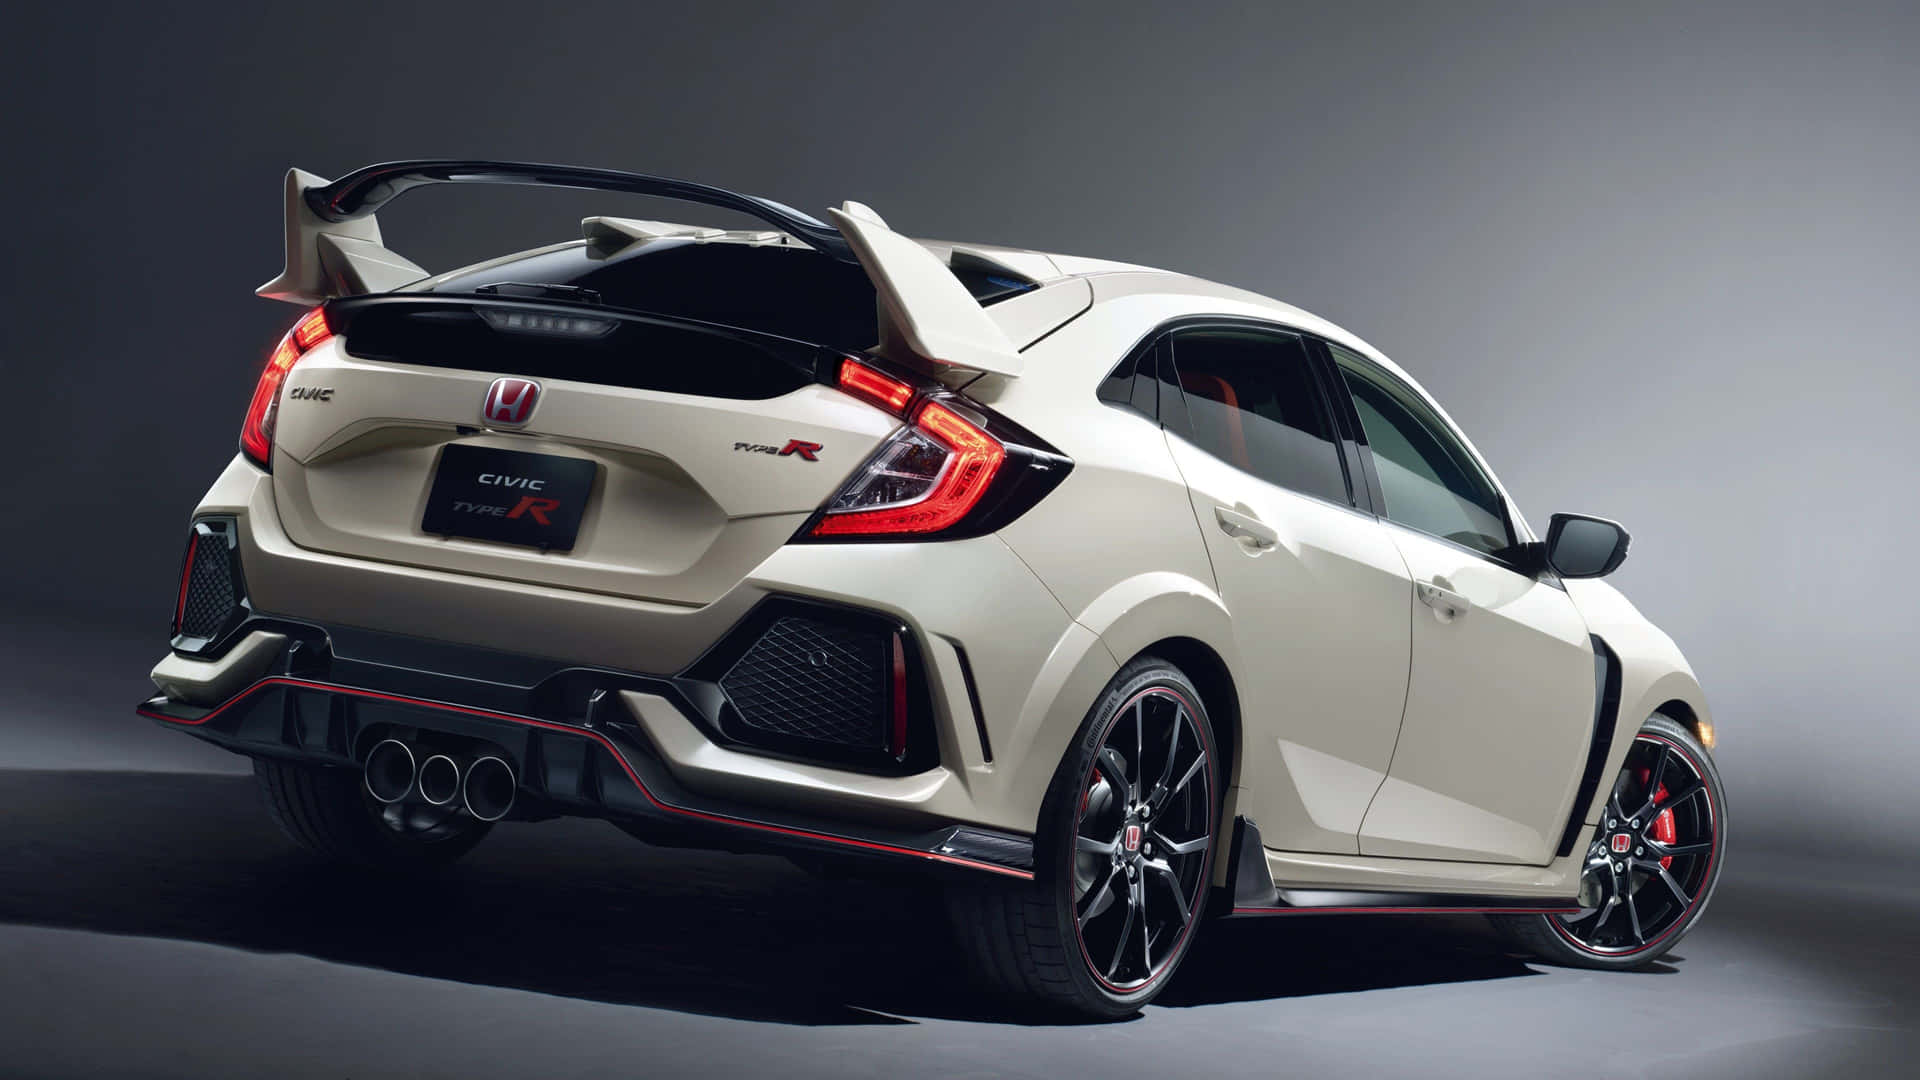 The Rear End Of A White Honda Civic Type R Wallpaper